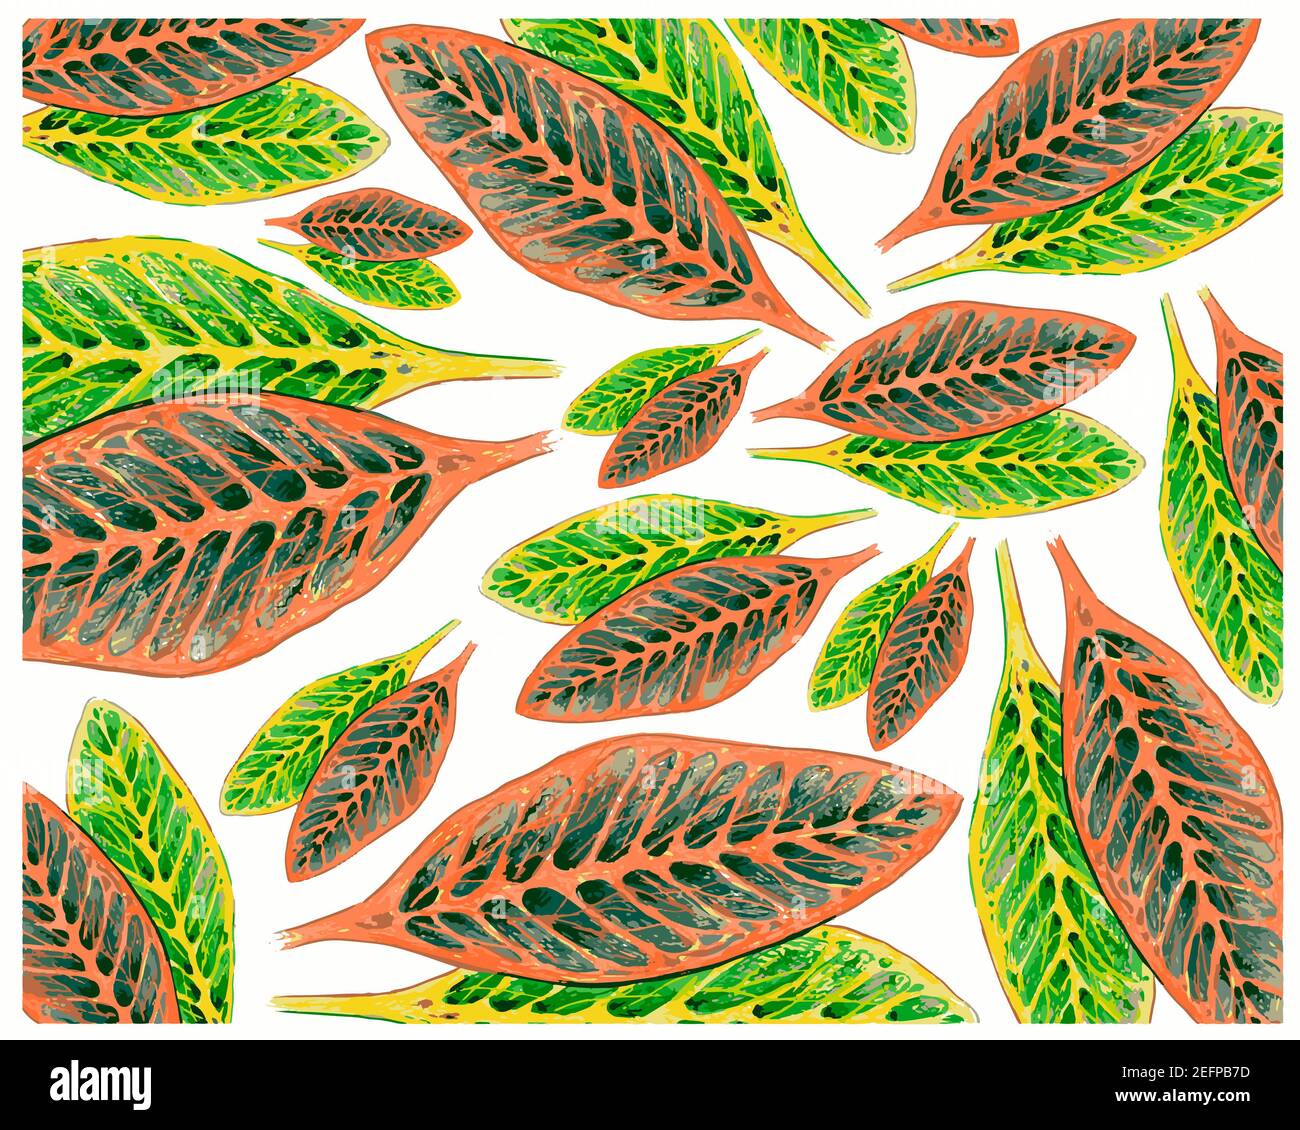 Ecological Concept, Illustration Background of Beautiful Green and Yellow Spot Croton Plants or Codiaeum Variegatium Plants For Garden Decor. Stock Photo